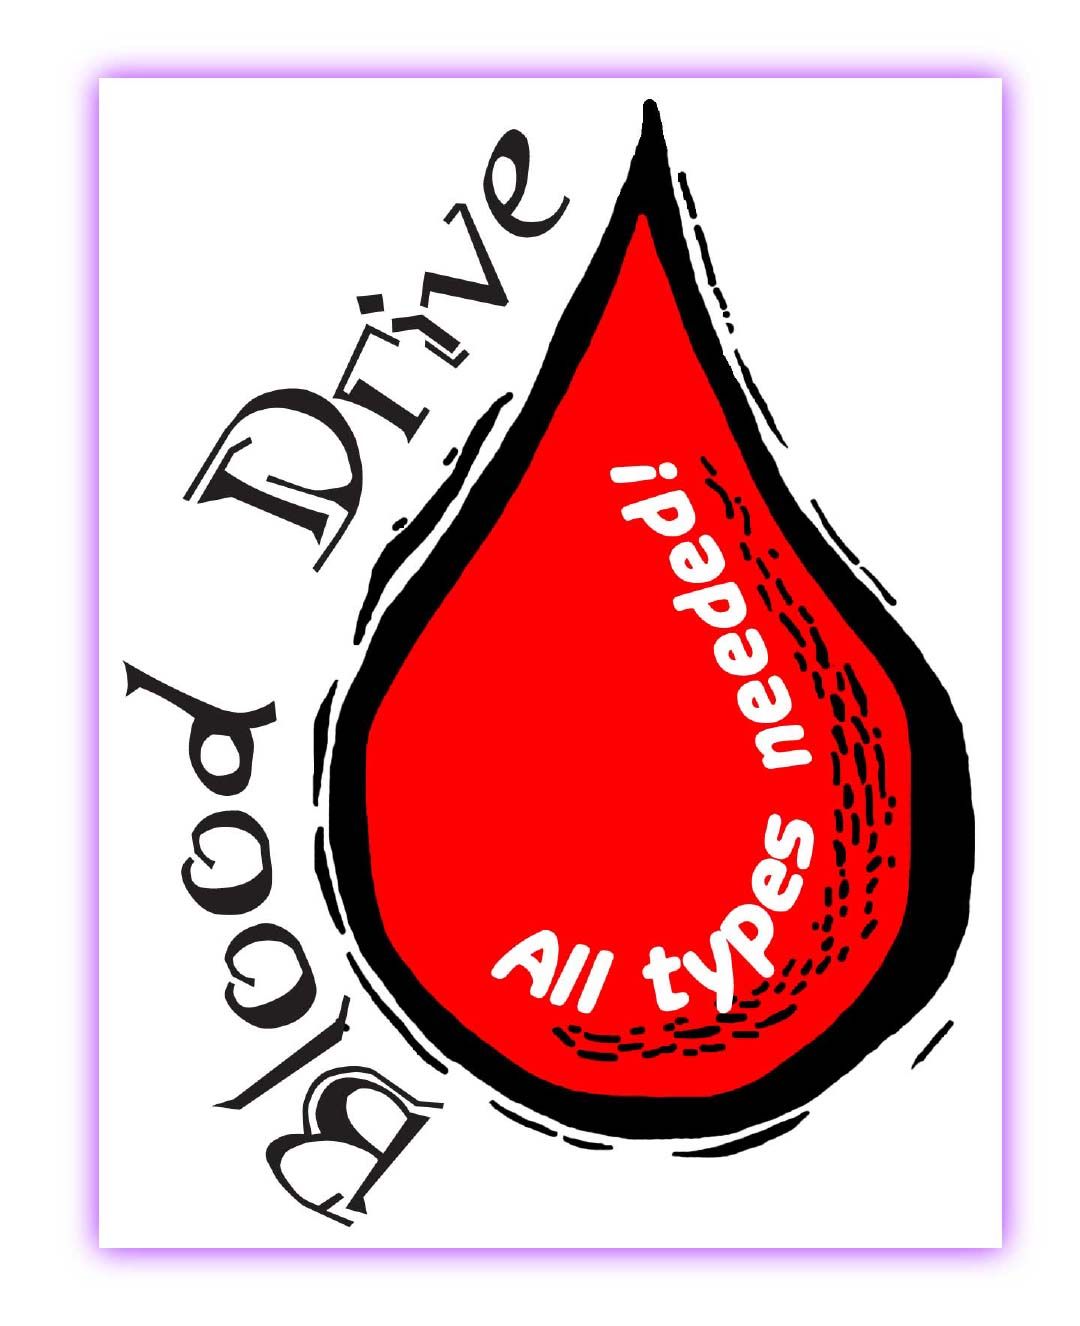 Free Red Cross Blood Drive Image, Download Free Clip Art, Free Clip Art on Clipart Library